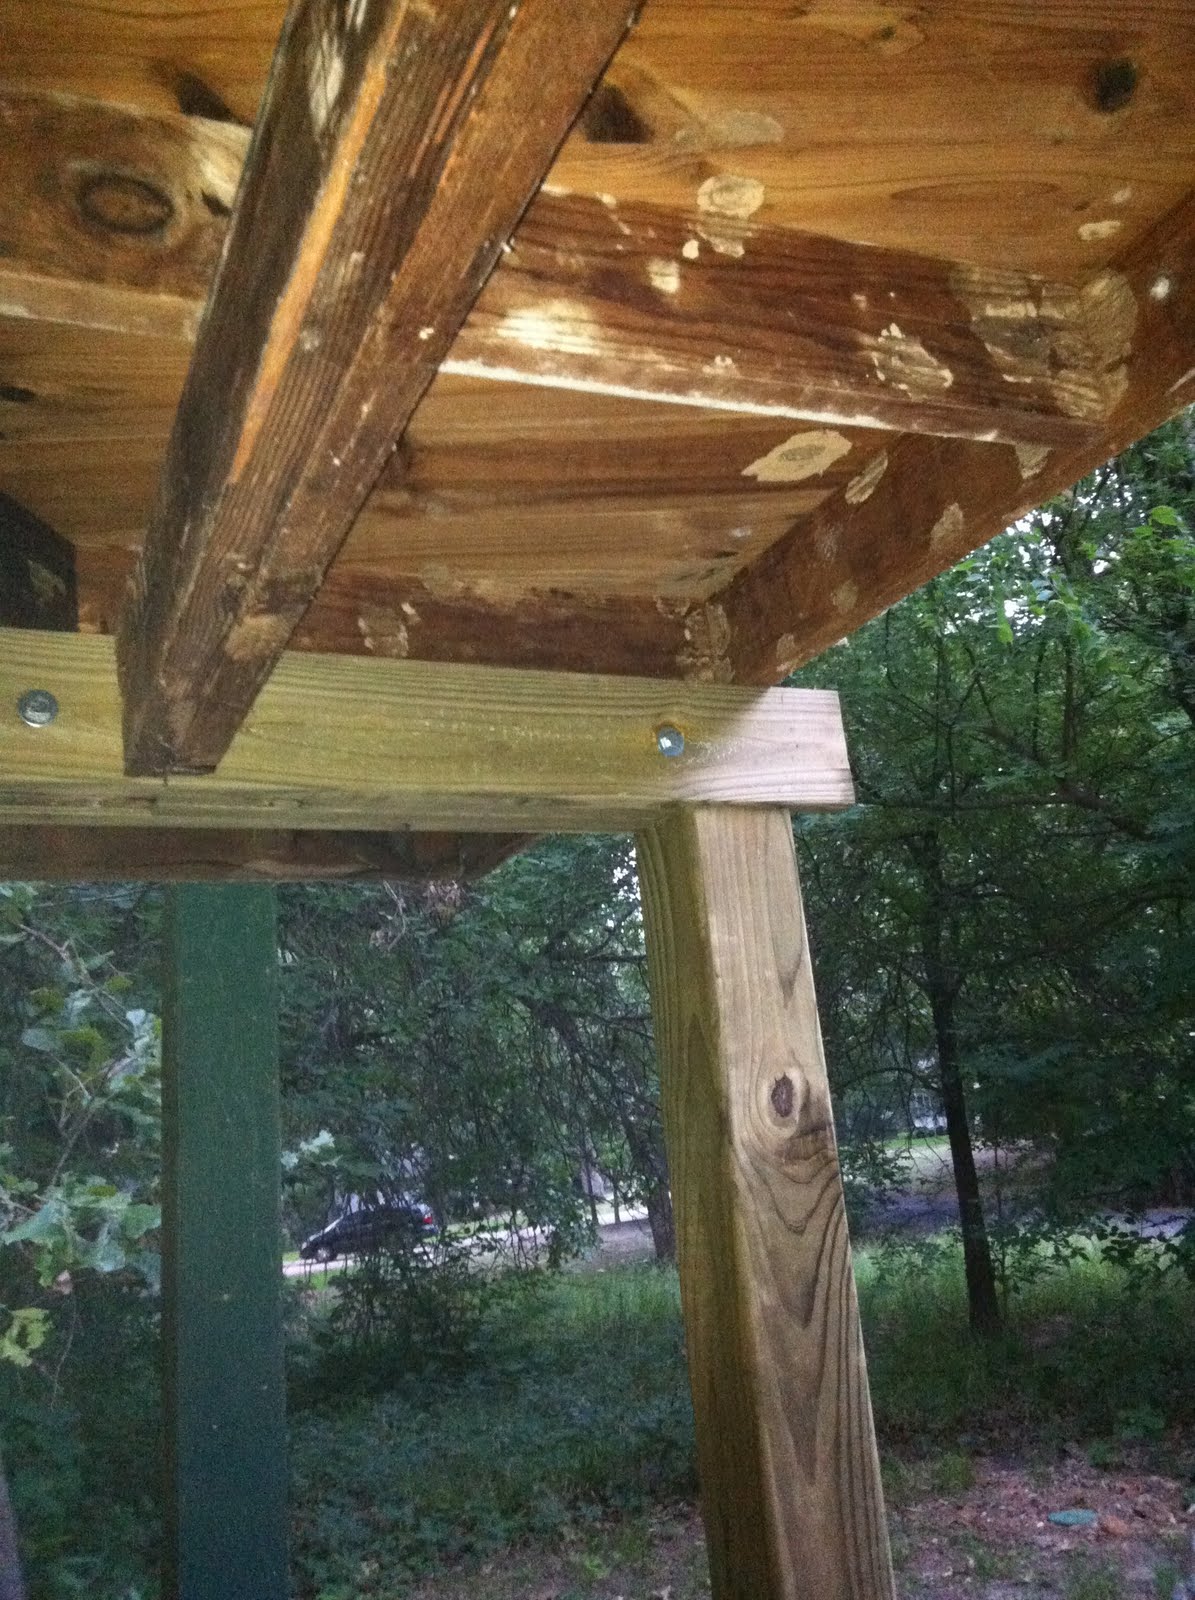 My Texas Round House: Carport woes....